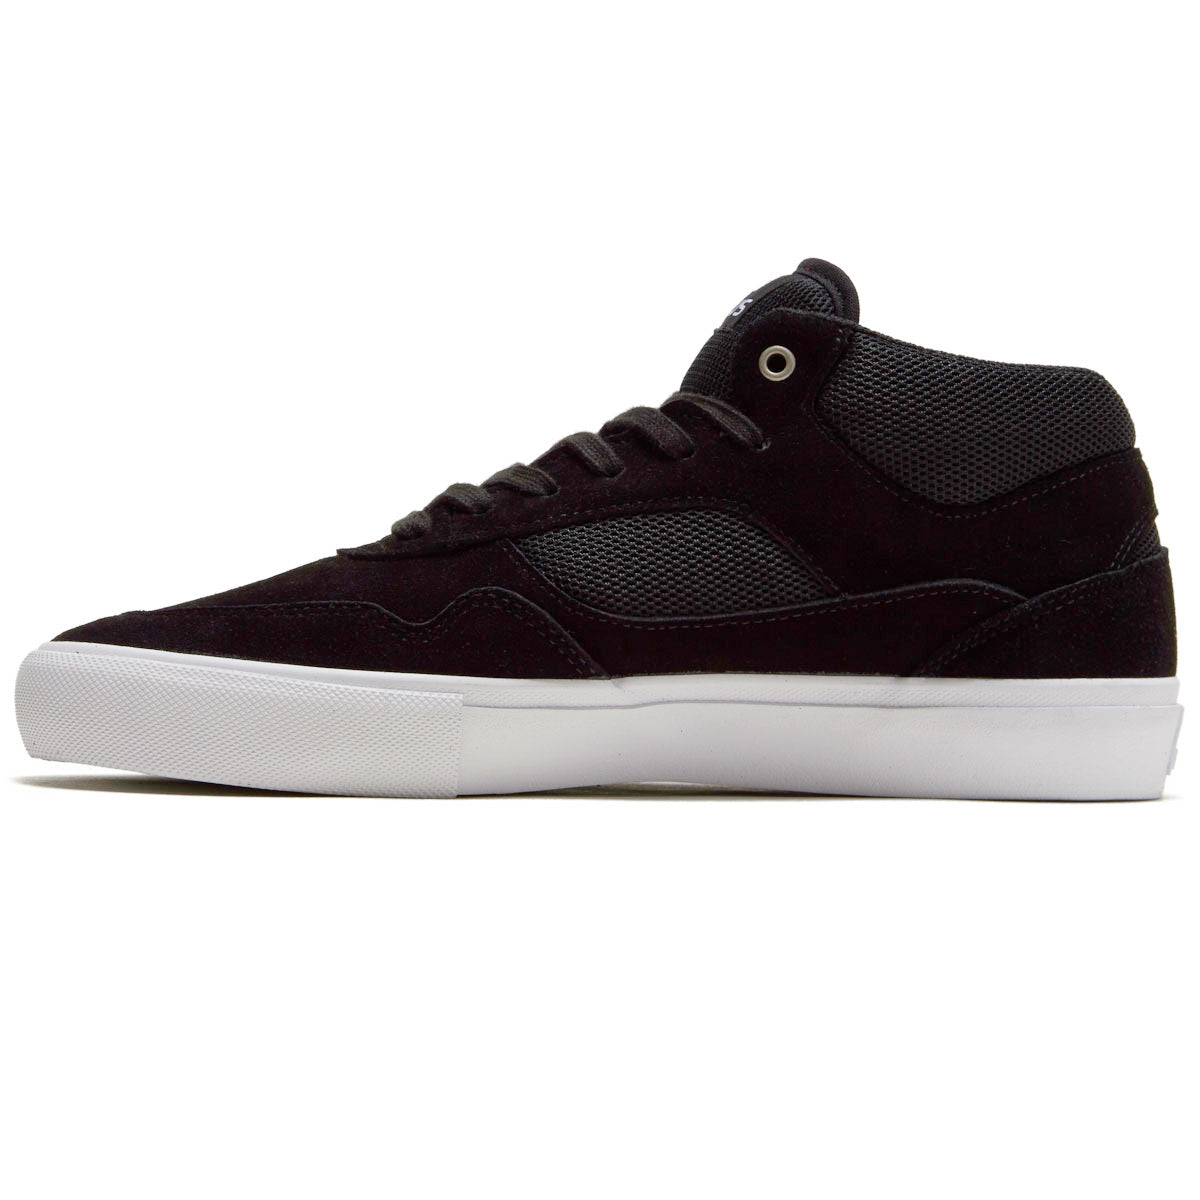 Opus Standard Mid Shoes - Black/White image 2